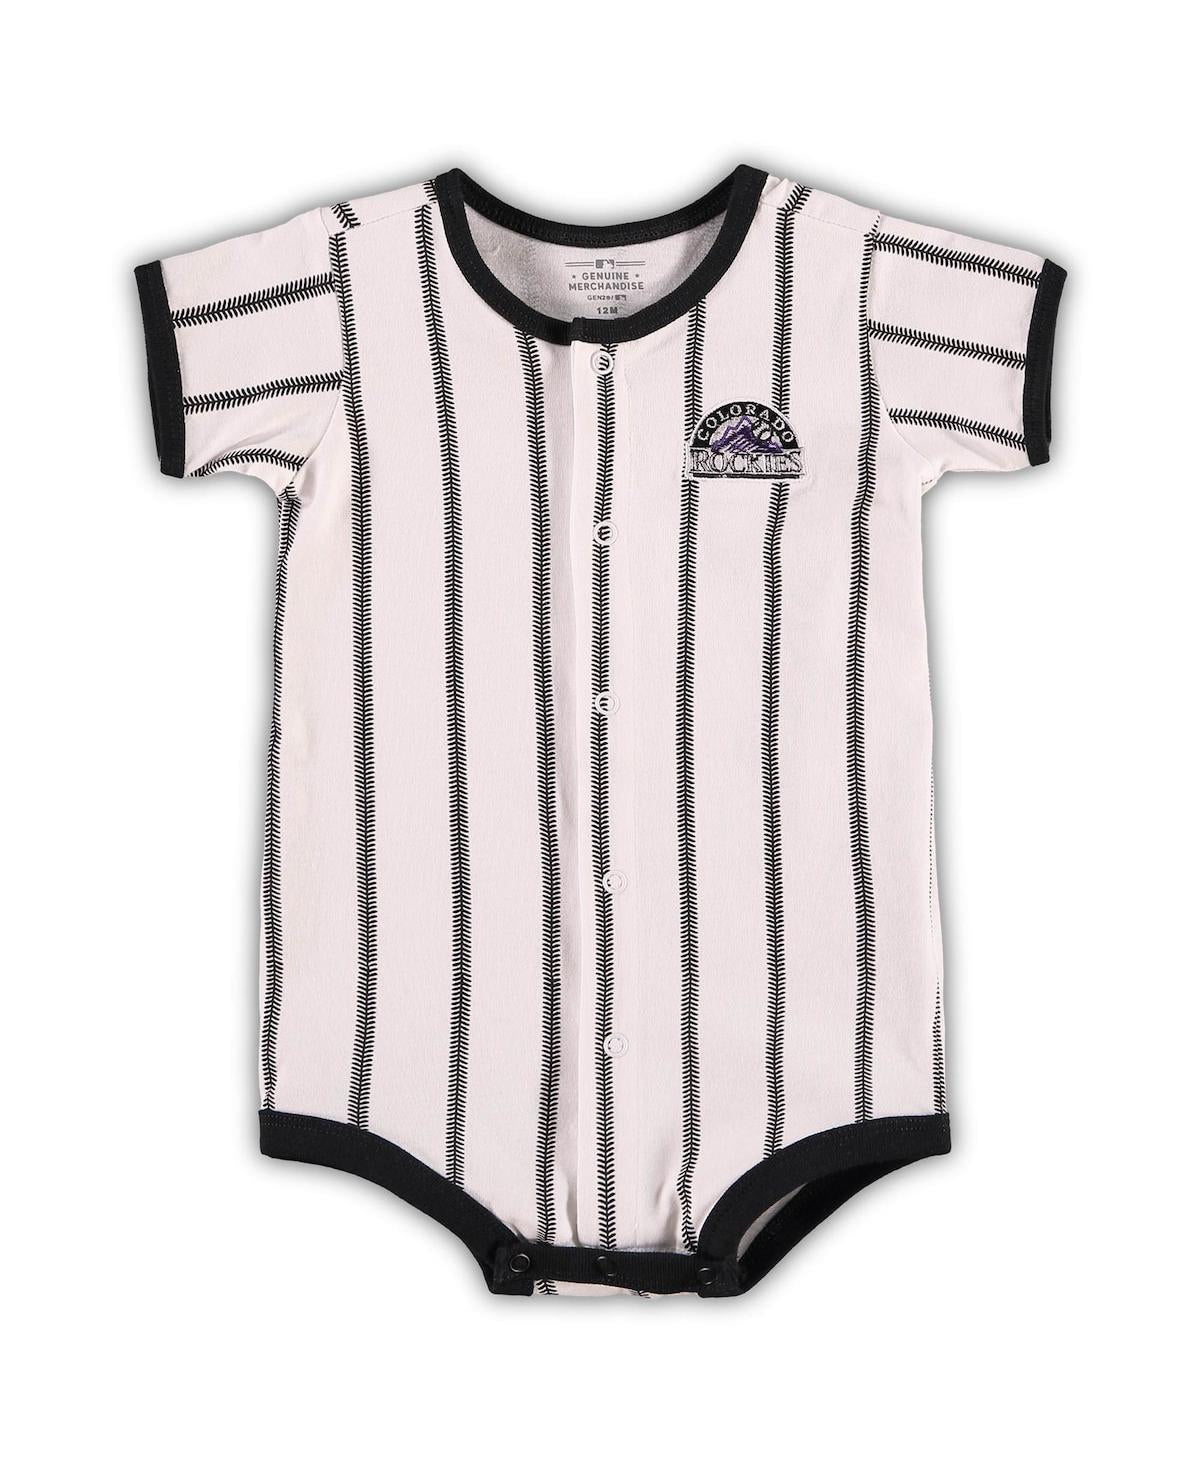 Infant White Colorado Rockies Pinstripe Power Hitter Coverall